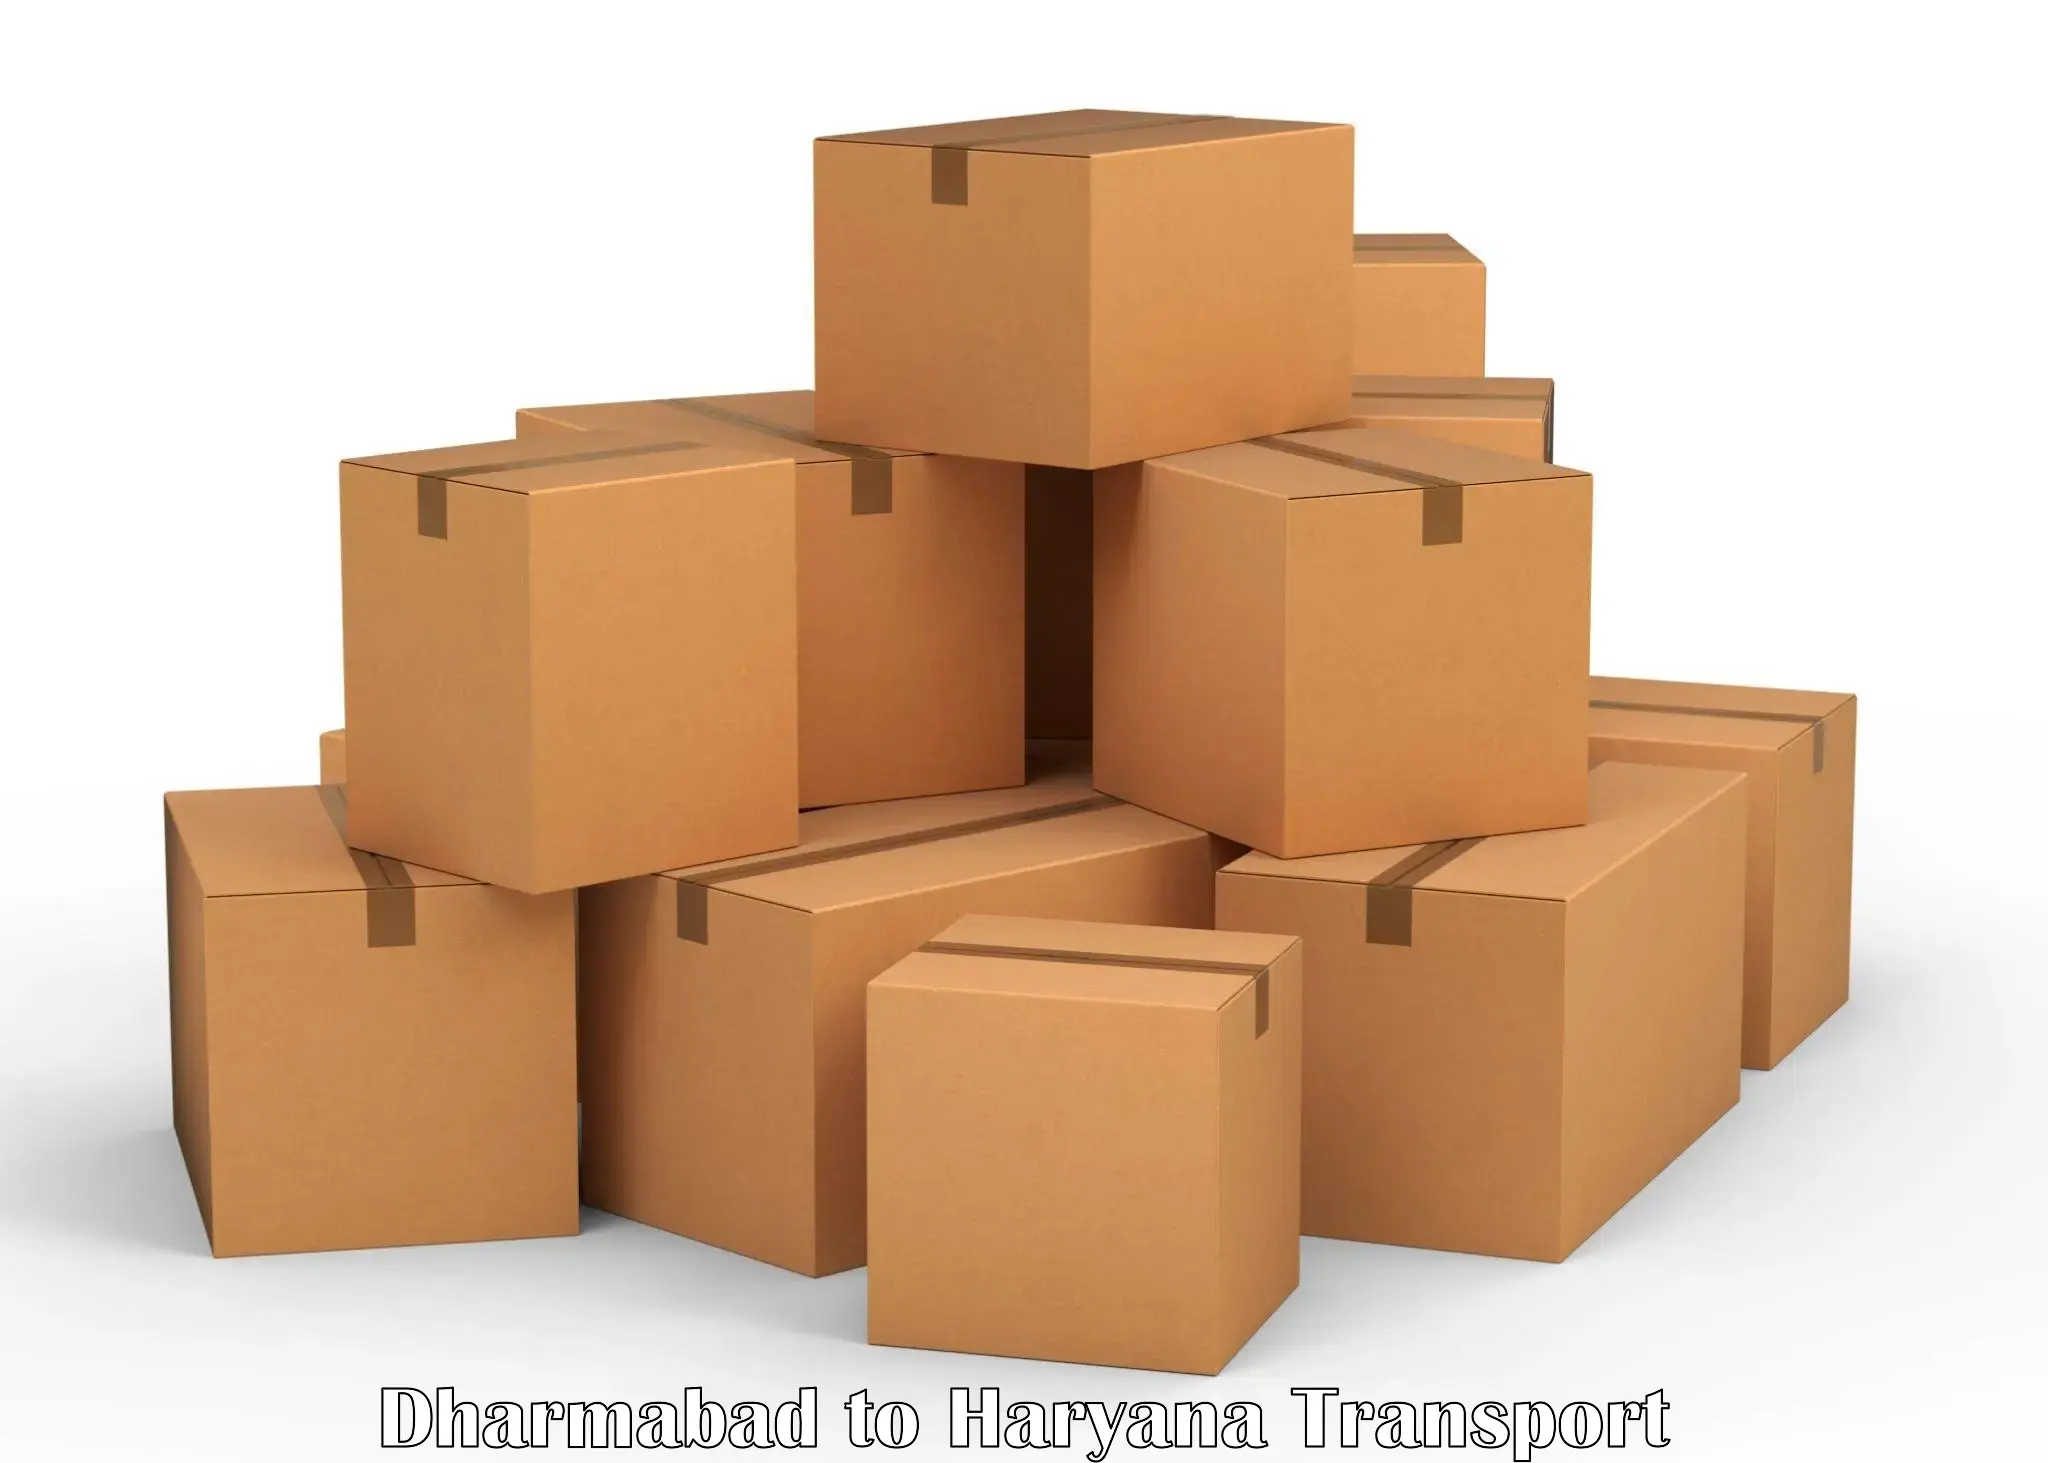 Furniture transport service in Dharmabad to Pinjore